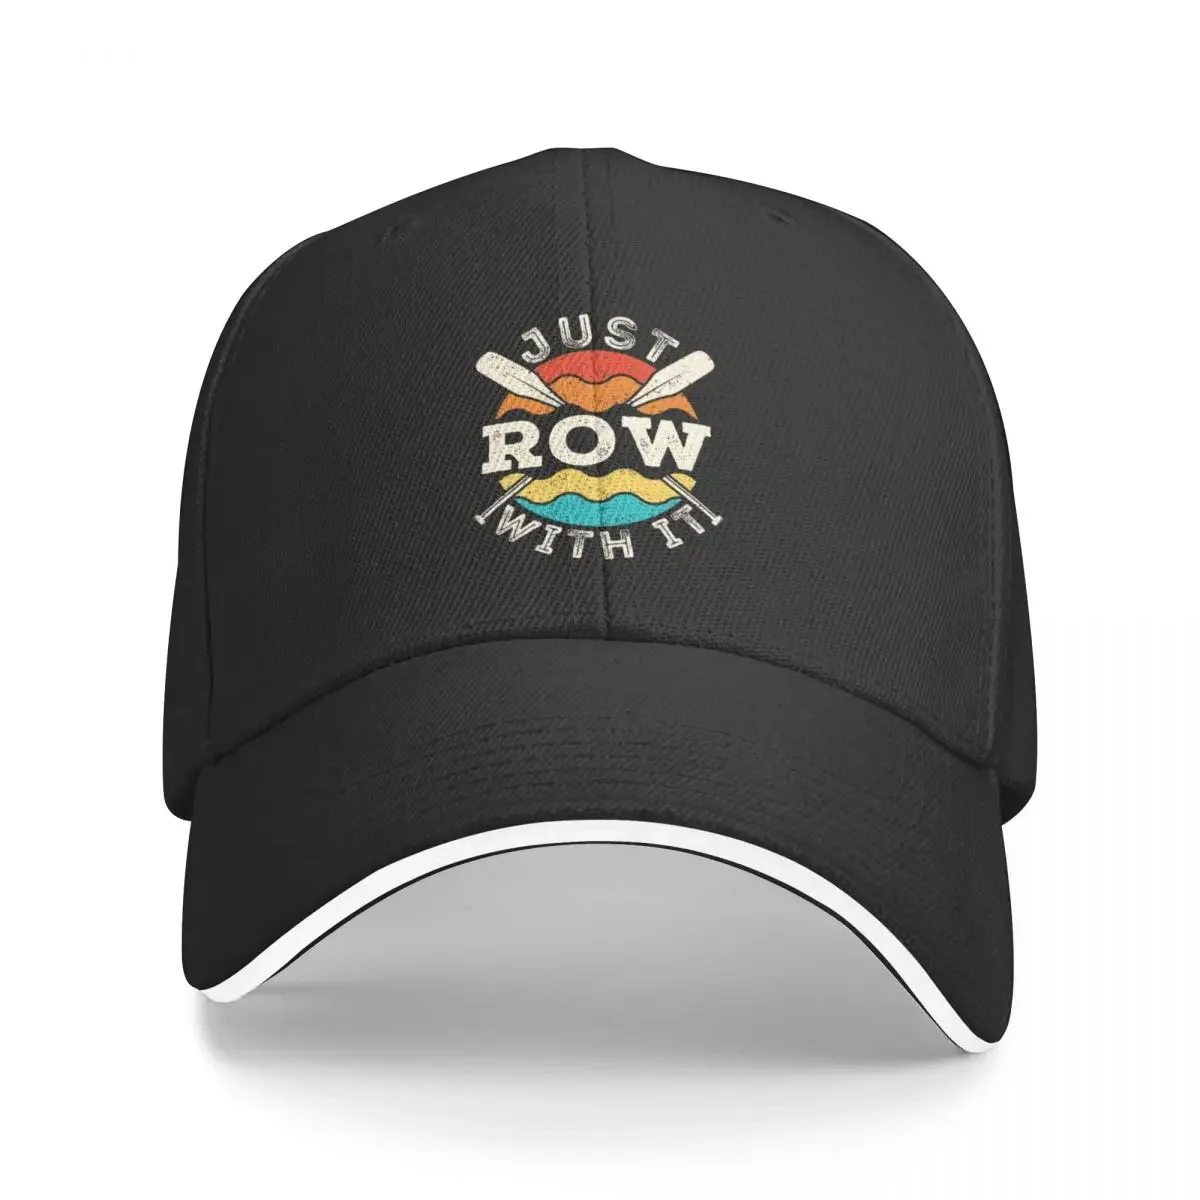 

New Just Row with It Rowing Rower Crew Team Oars Baseball Cap derby hat Hat Man For The Sun Hat Ladies Men's